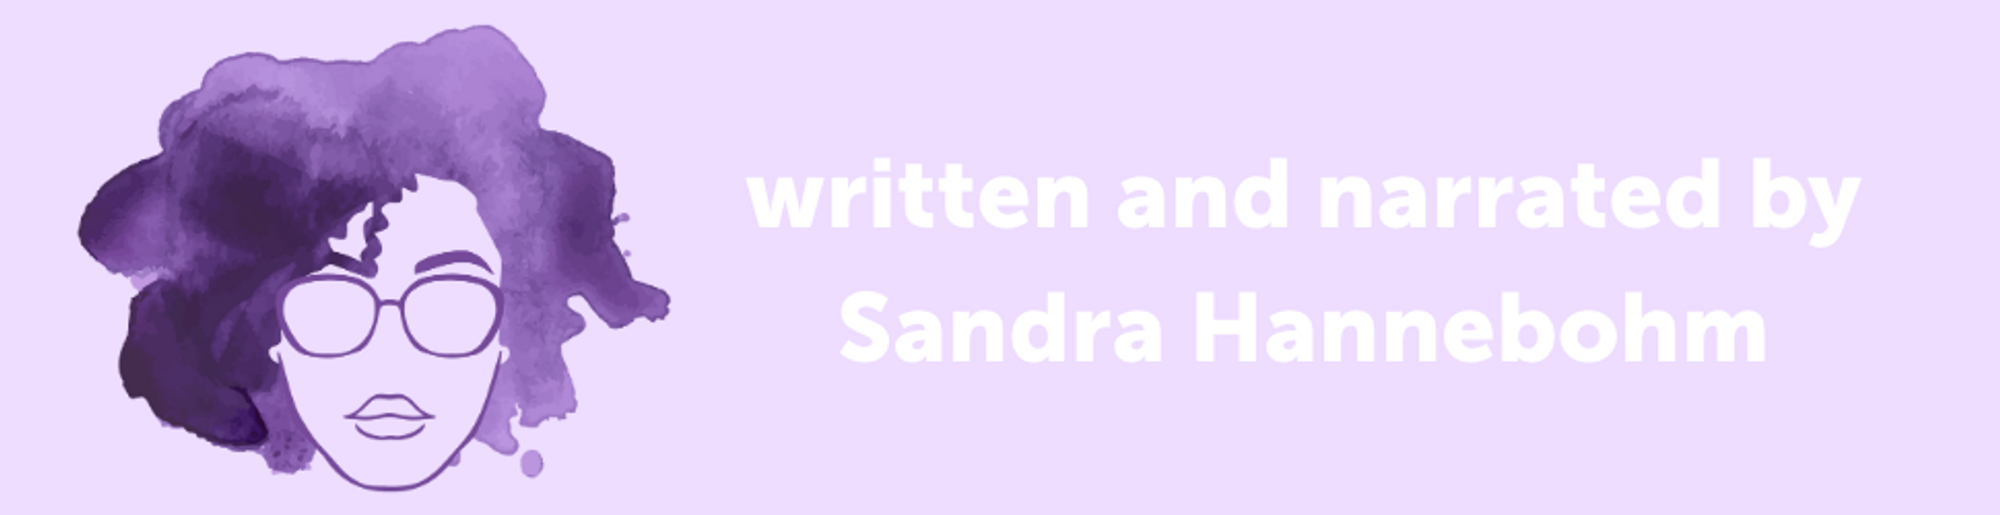 The Twice As Good logo is shown to the left of text which reads, "written and narrated by Sandra Hanneohm"